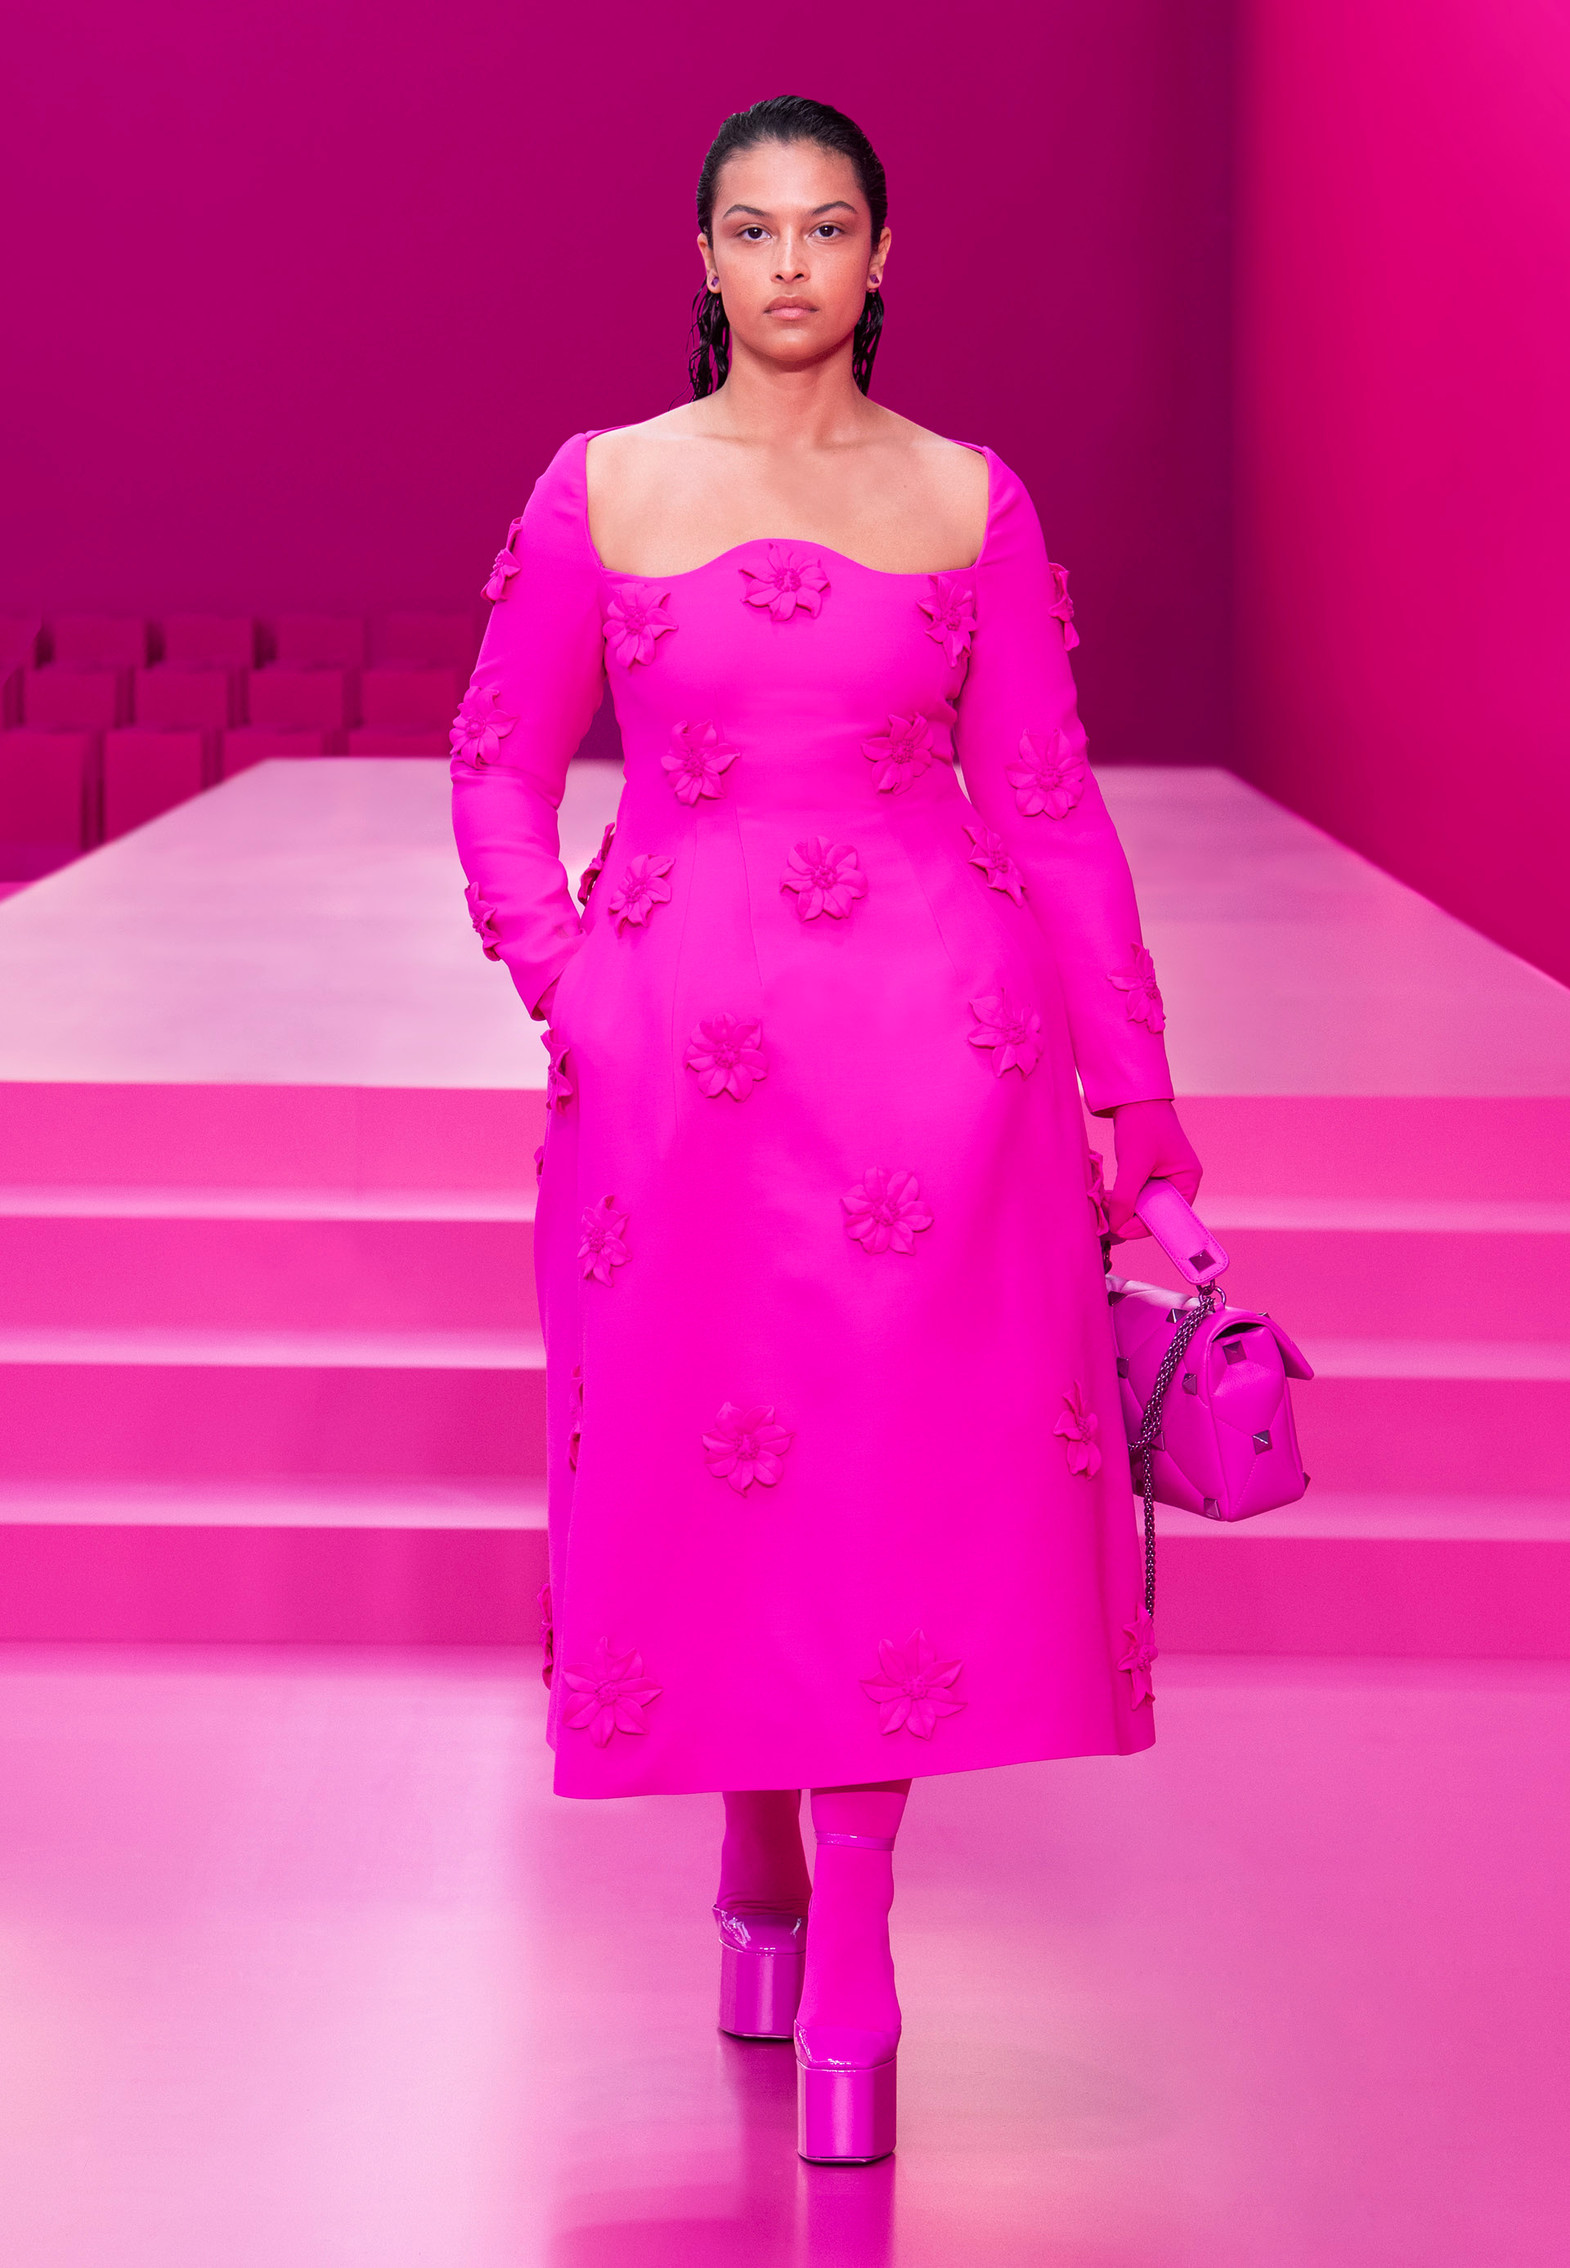 One of the all-pink looks designed by Valentino for their womenswear PP 2022-2023 collection. 